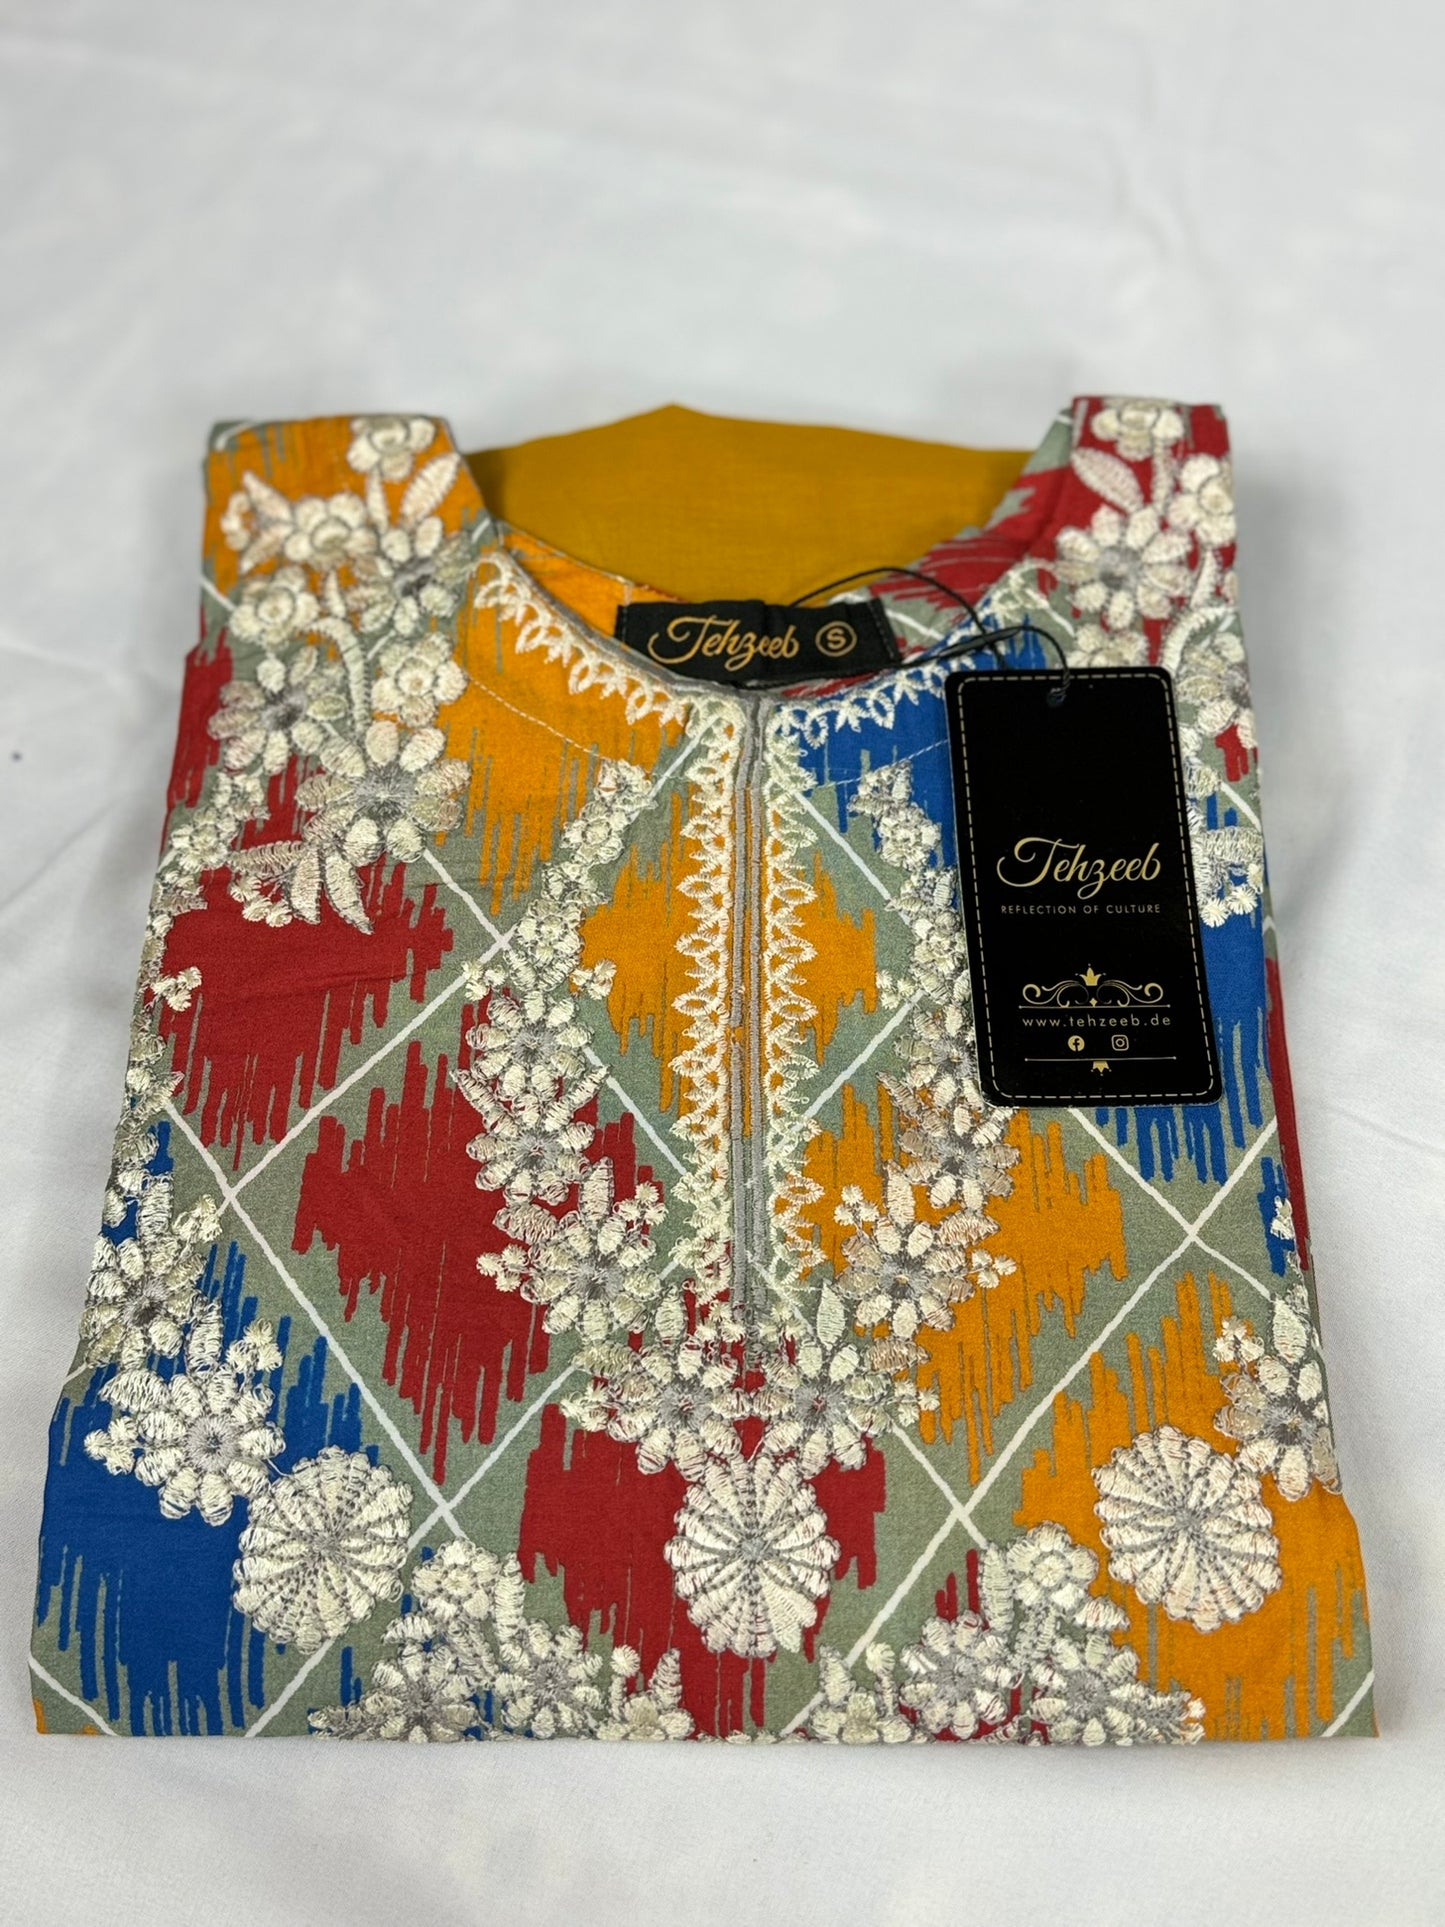 2 Piece - Cotton - Digital Printed - Frock - Embroidered - Multicolor - 2100